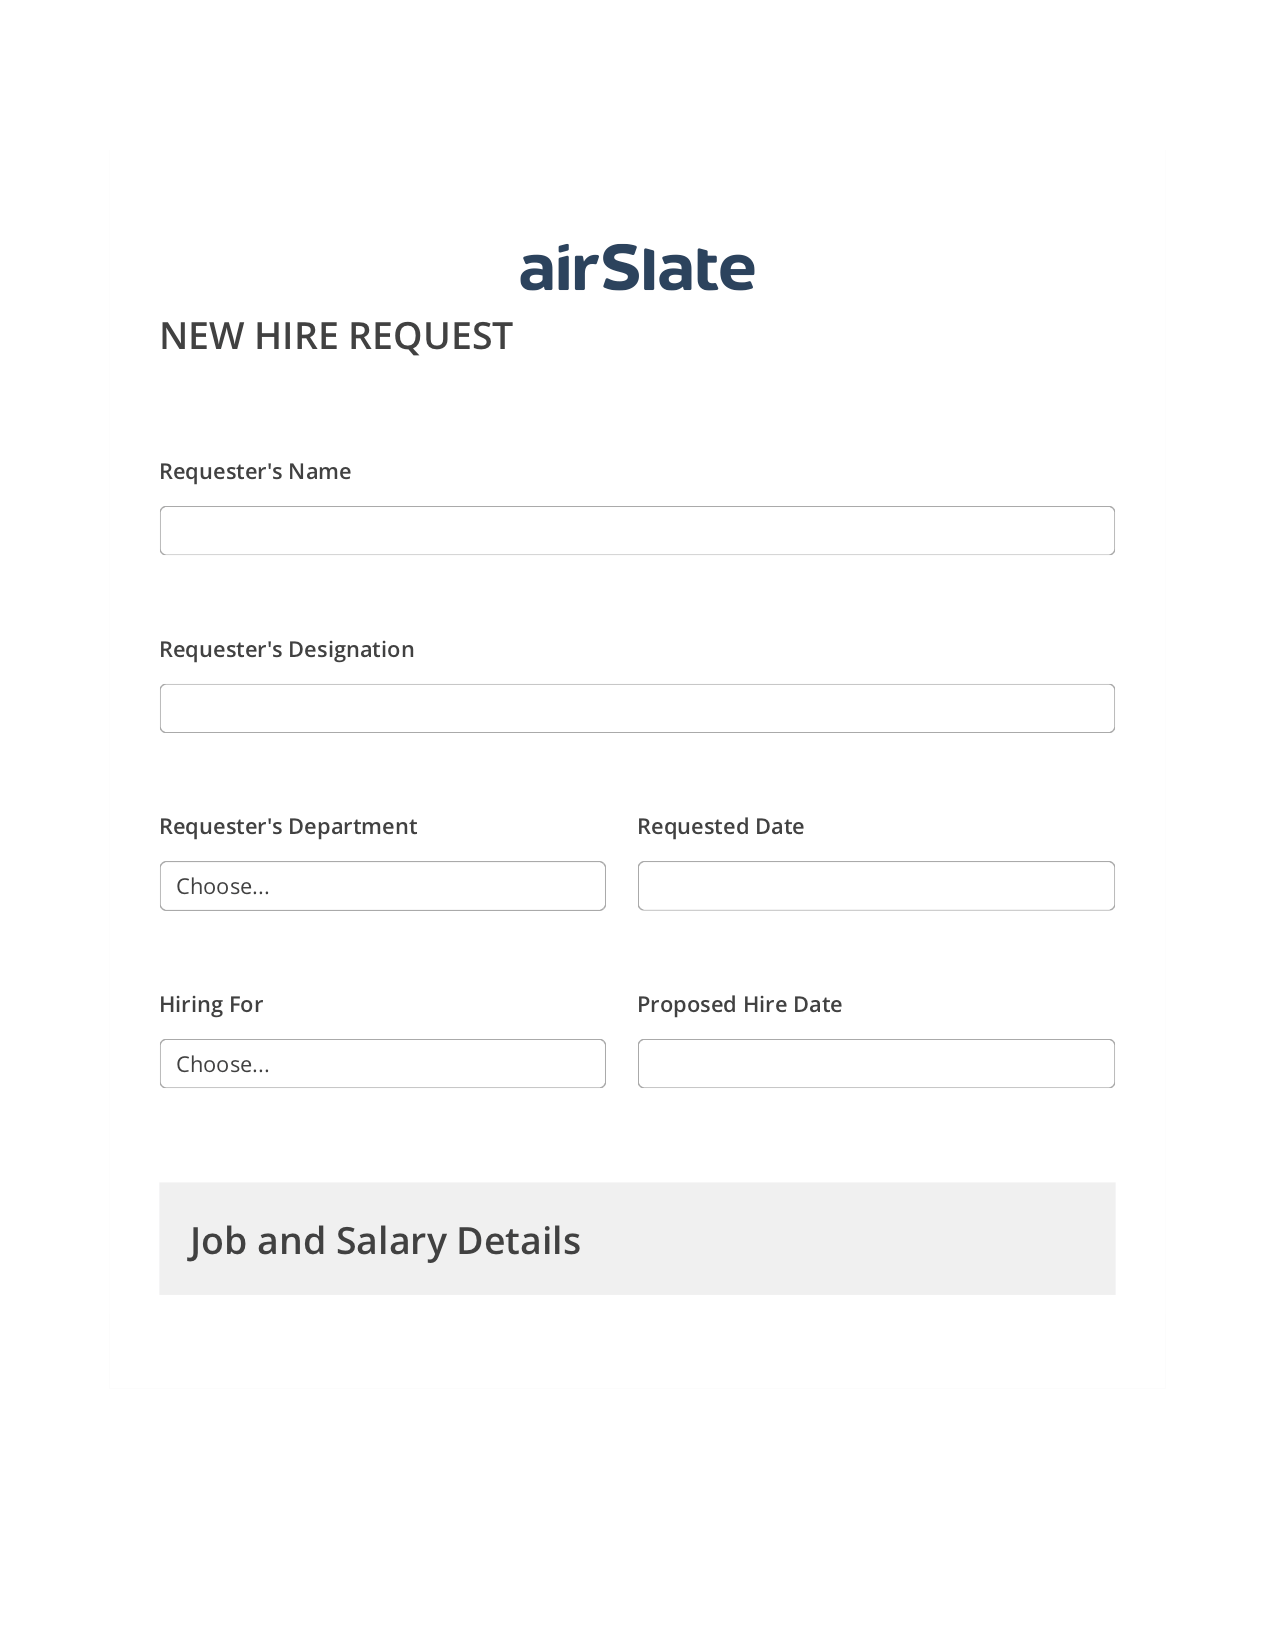 Multirole Hiring Request Workflow Pre-fill from Excel Spreadsheet Bot, Create slate from another Flow Bot, Archive to Google Drive Bot